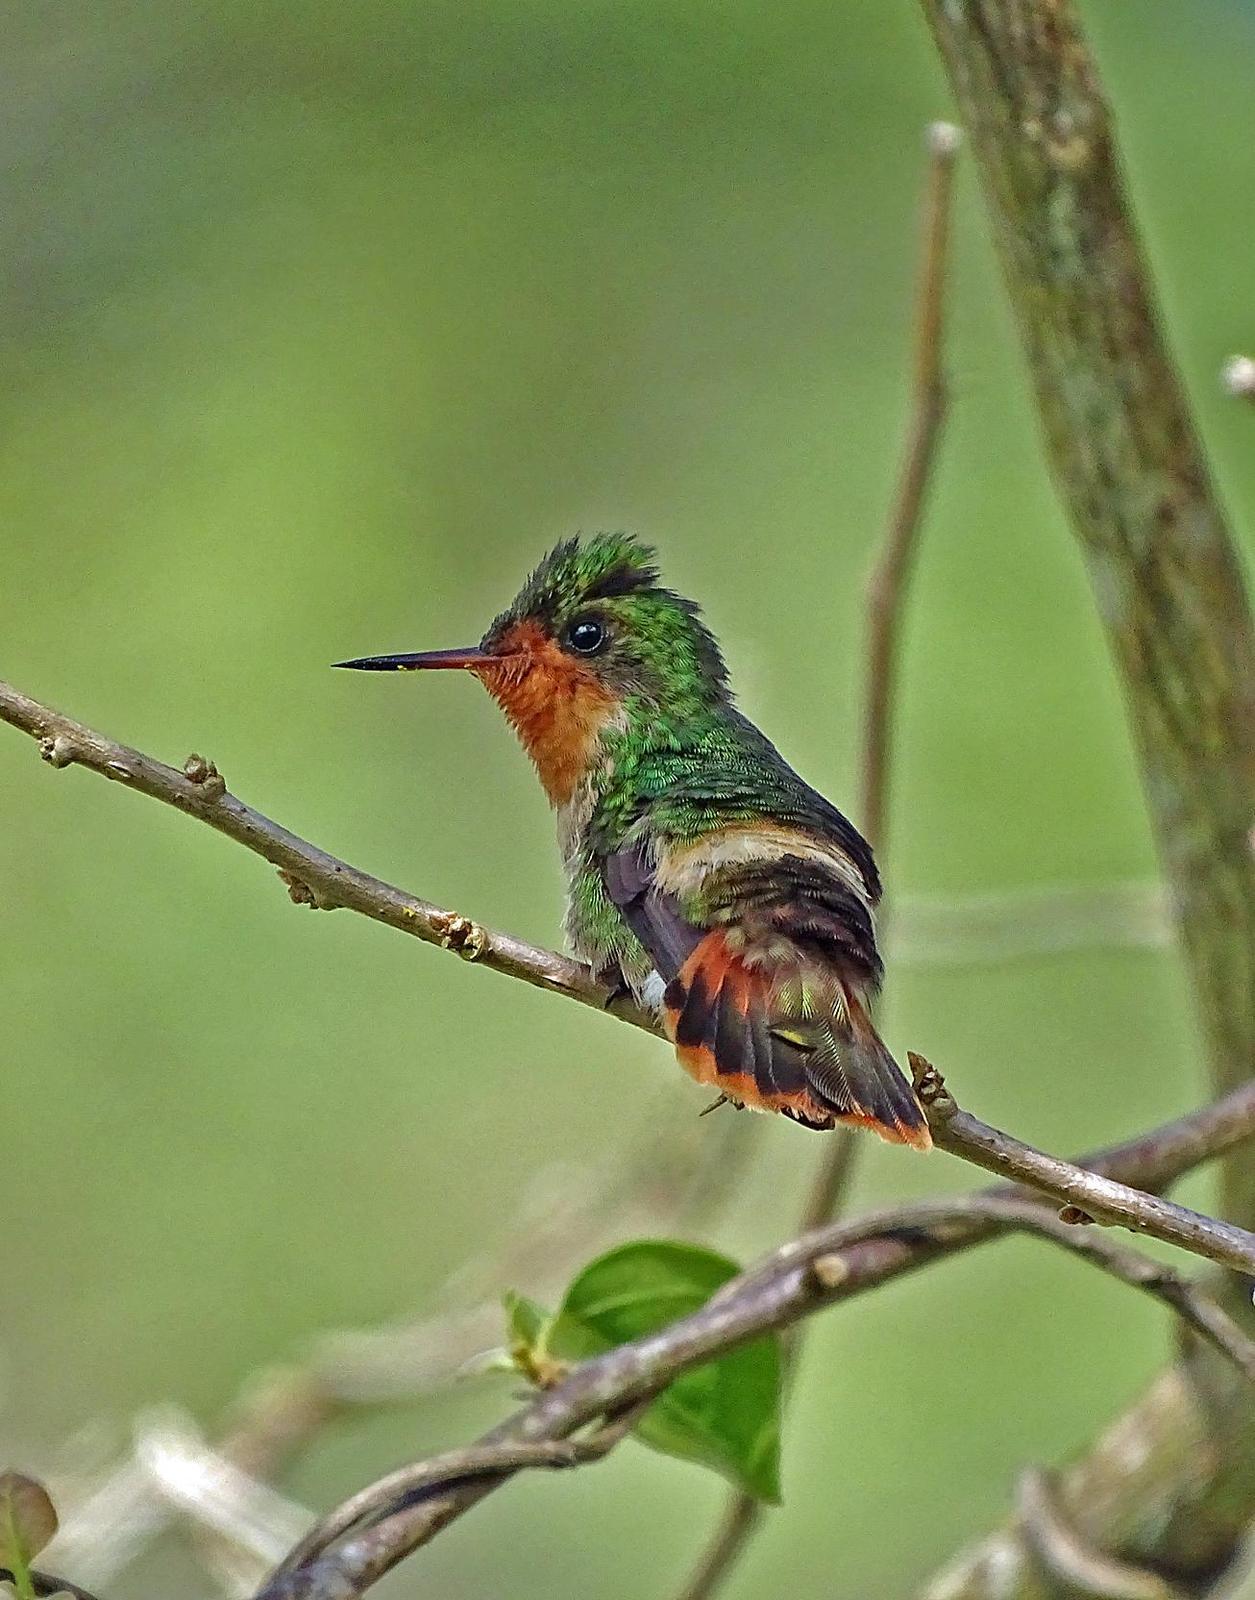 Tufted Coquette Photo by Robert Behrstock